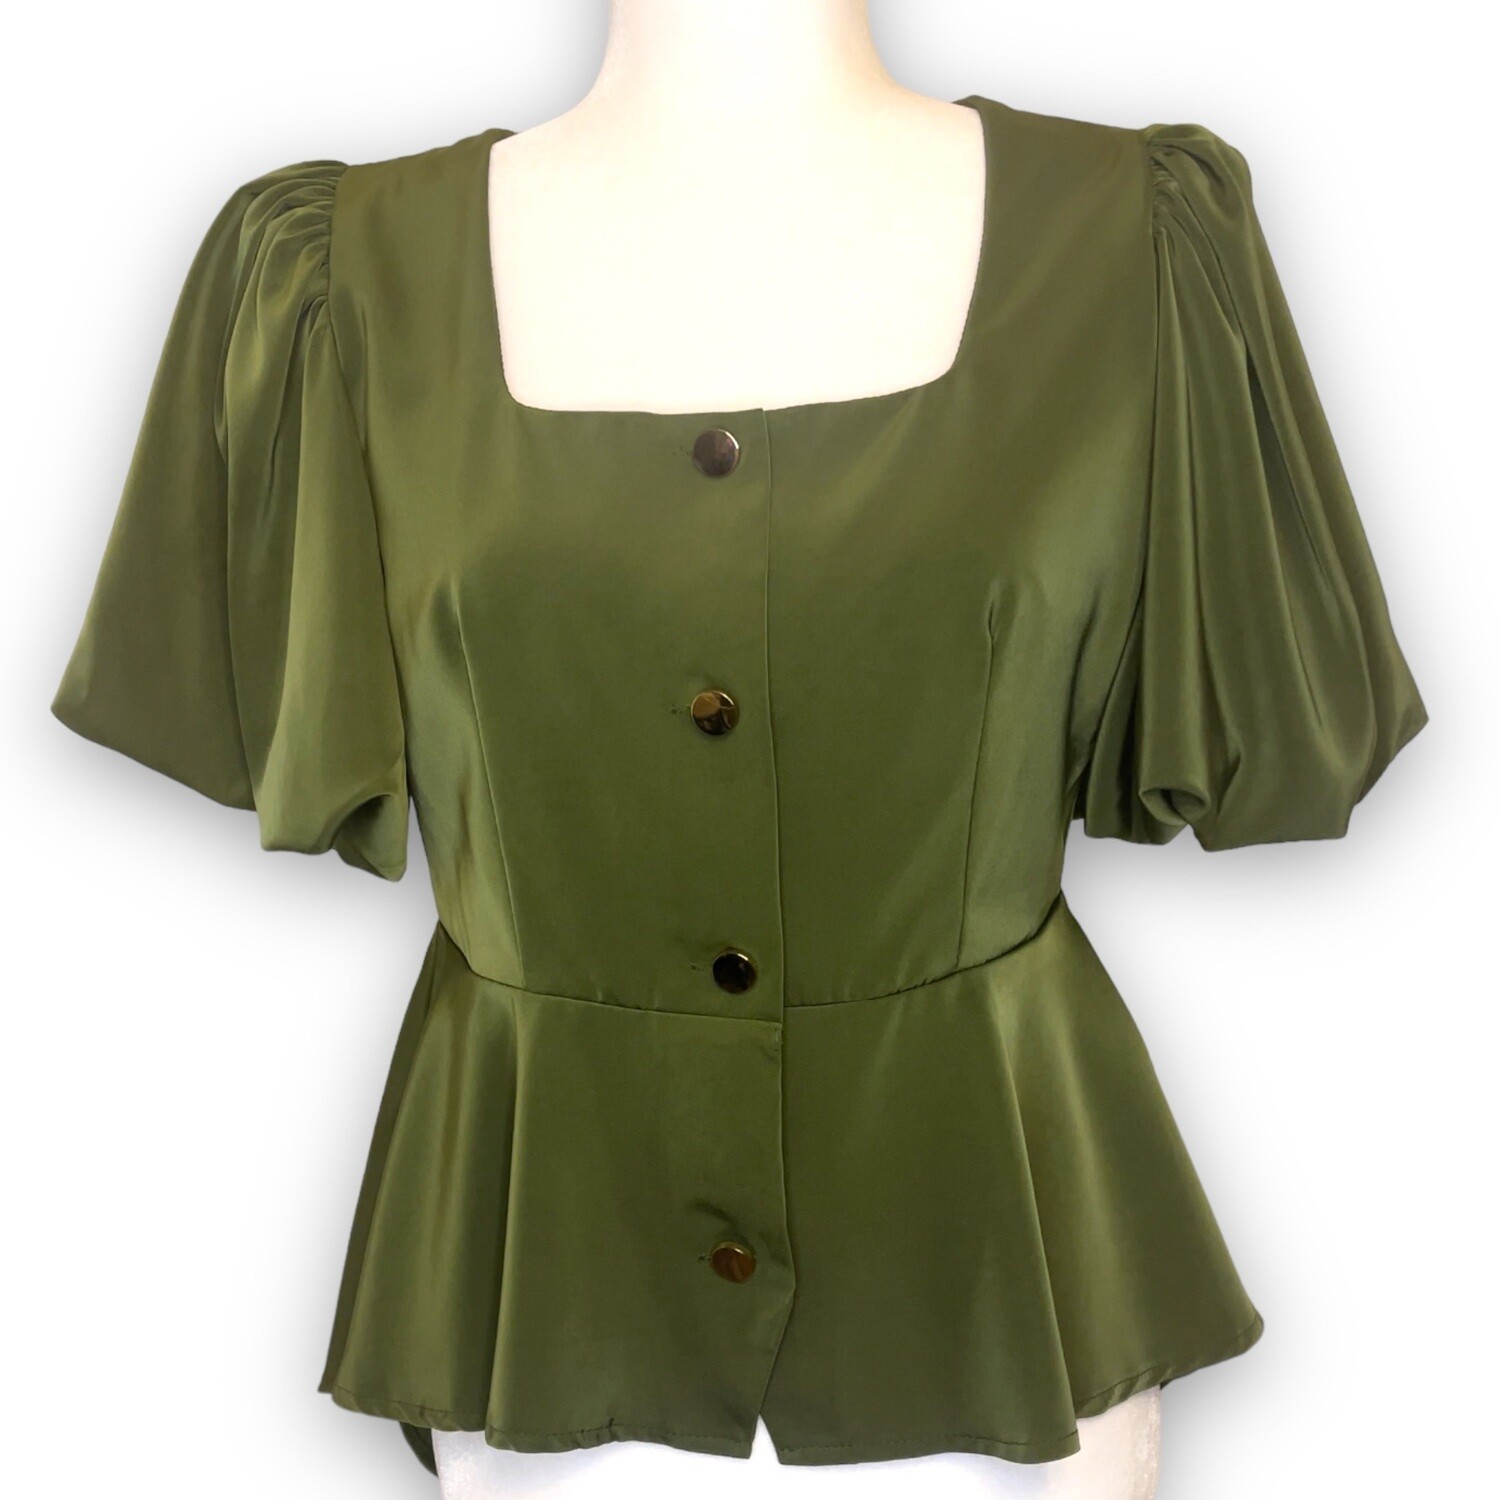 Olive Green Blouse w/ Gold Buttons